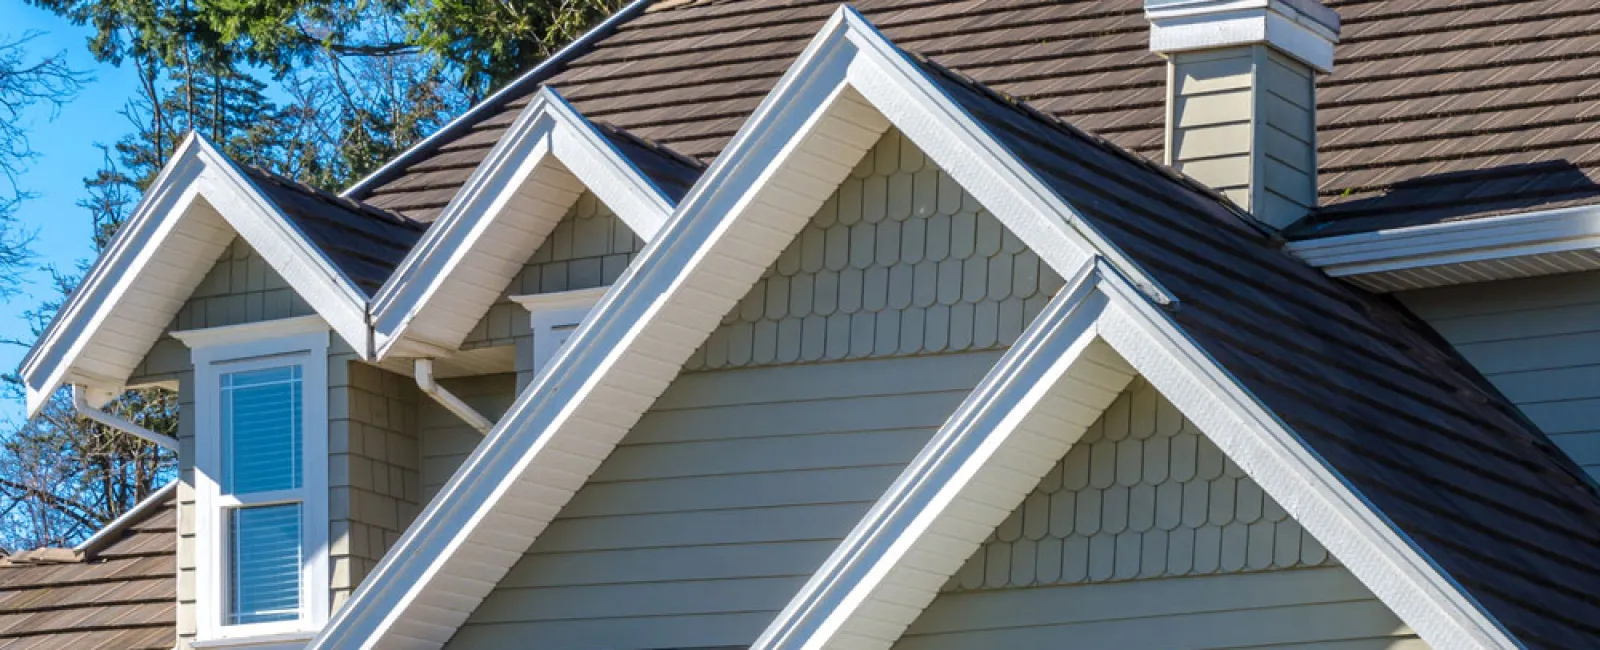 Roof Sagging: Possible Causes